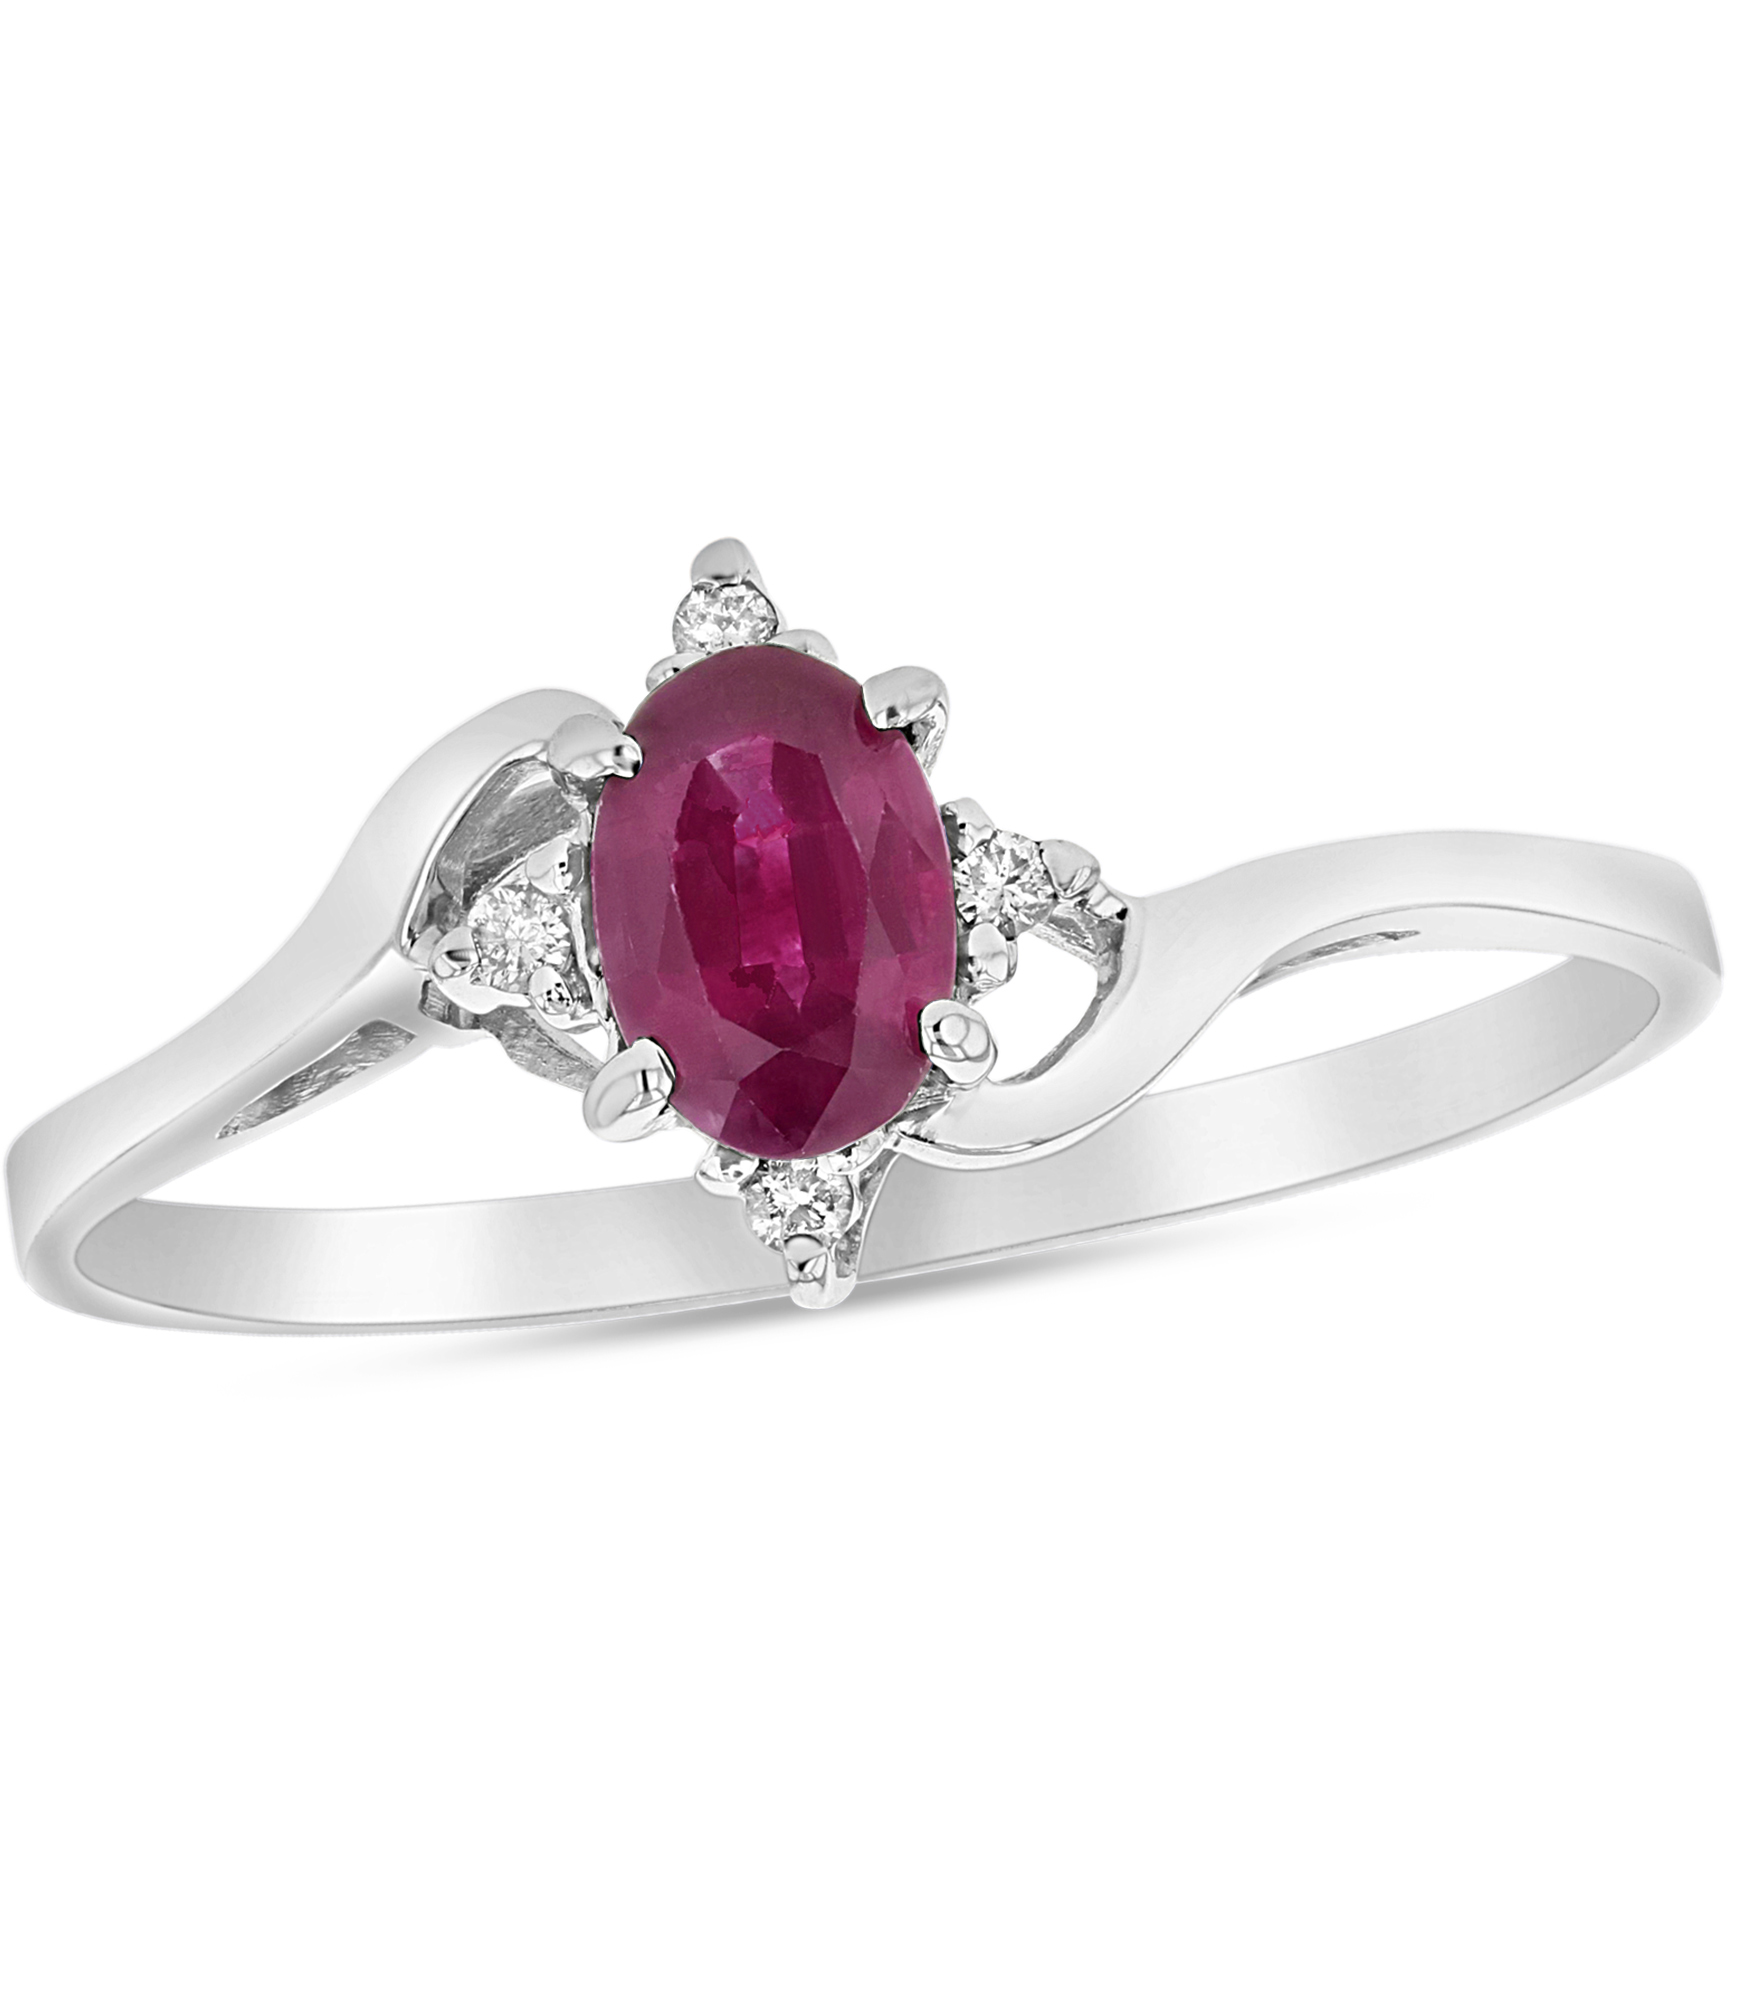 View 0.43ctw Oval Natural Heated Ruby and Diamond Ring set in 14k Gold